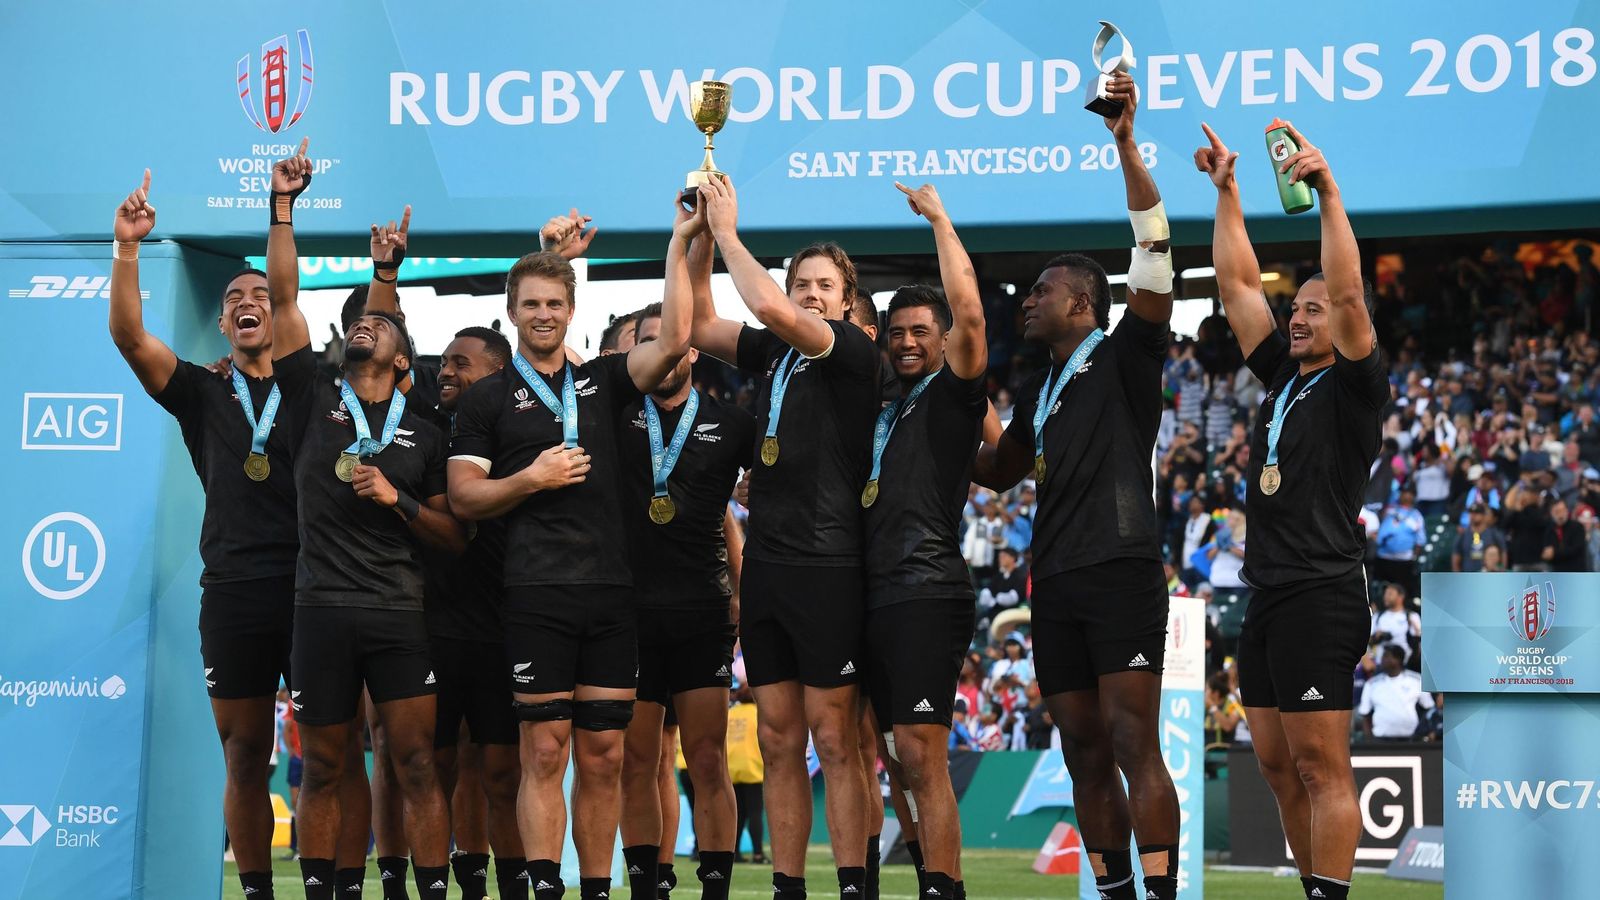 England beaten by New Zealand in World Cup Sevens final Rugby Union News Sky Sports